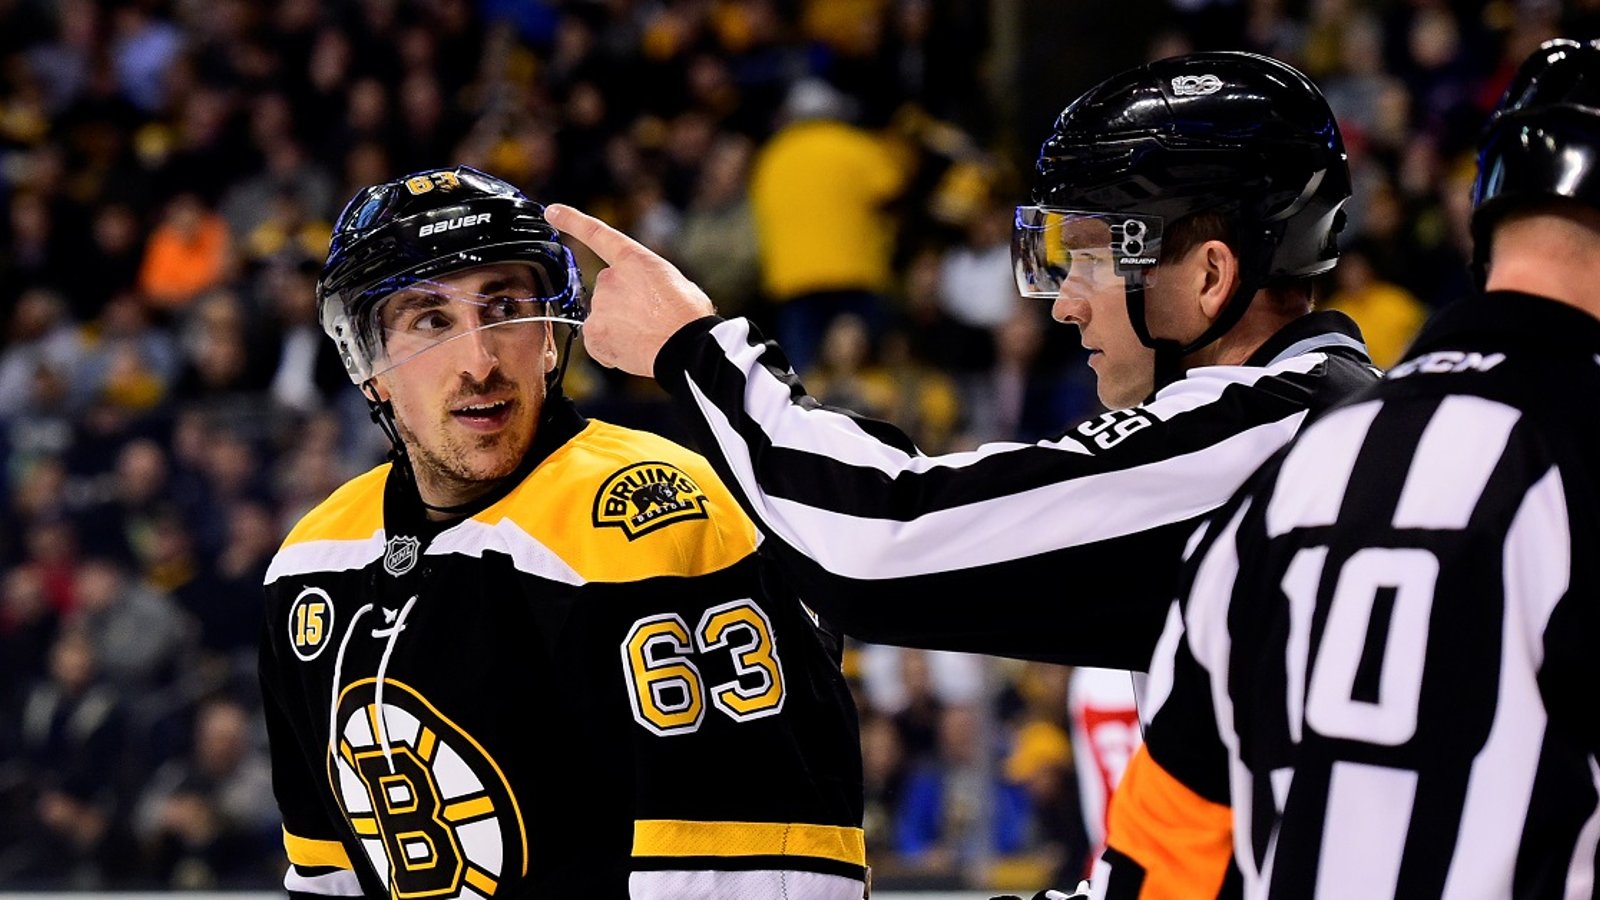 Cassidy calls out NHL official over treatment of Brad Marchand.